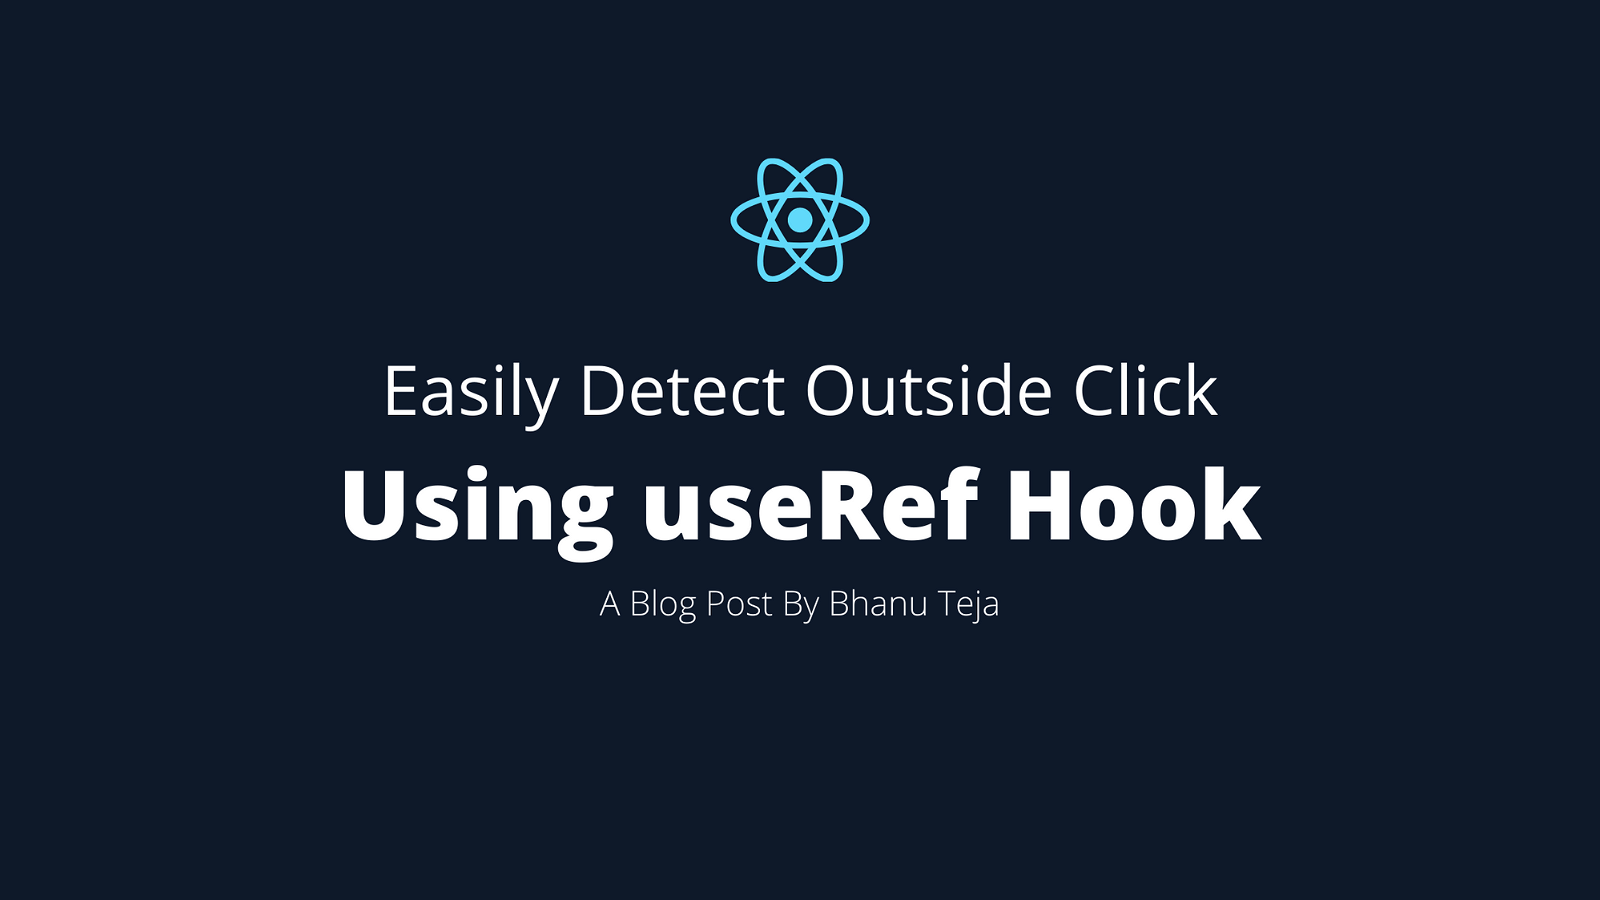 Easily Detect Outside Click Using useRef Hook